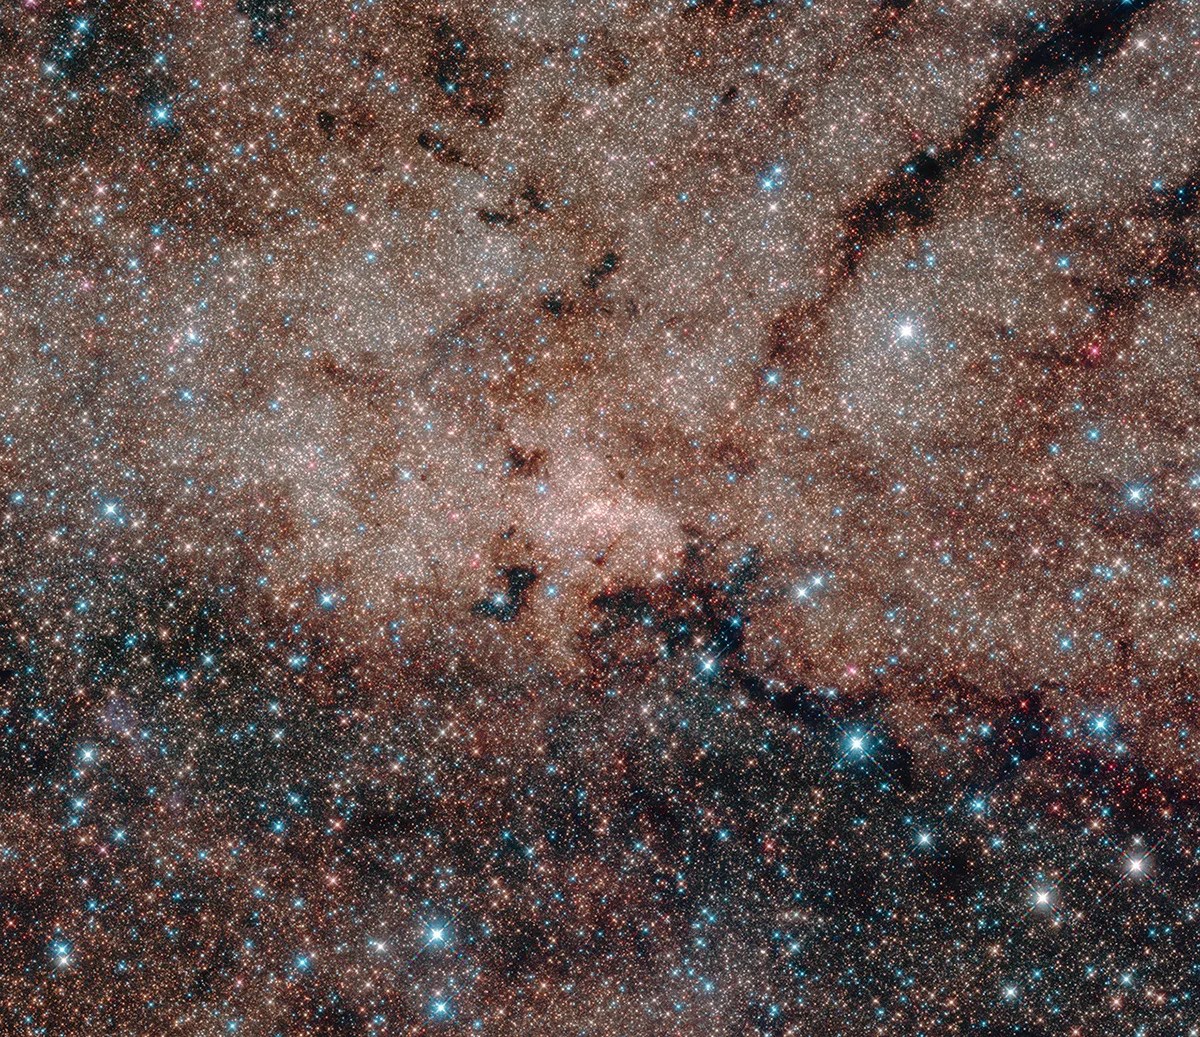 Infrared Hubble image of a star cluster at the core of the Milky Way